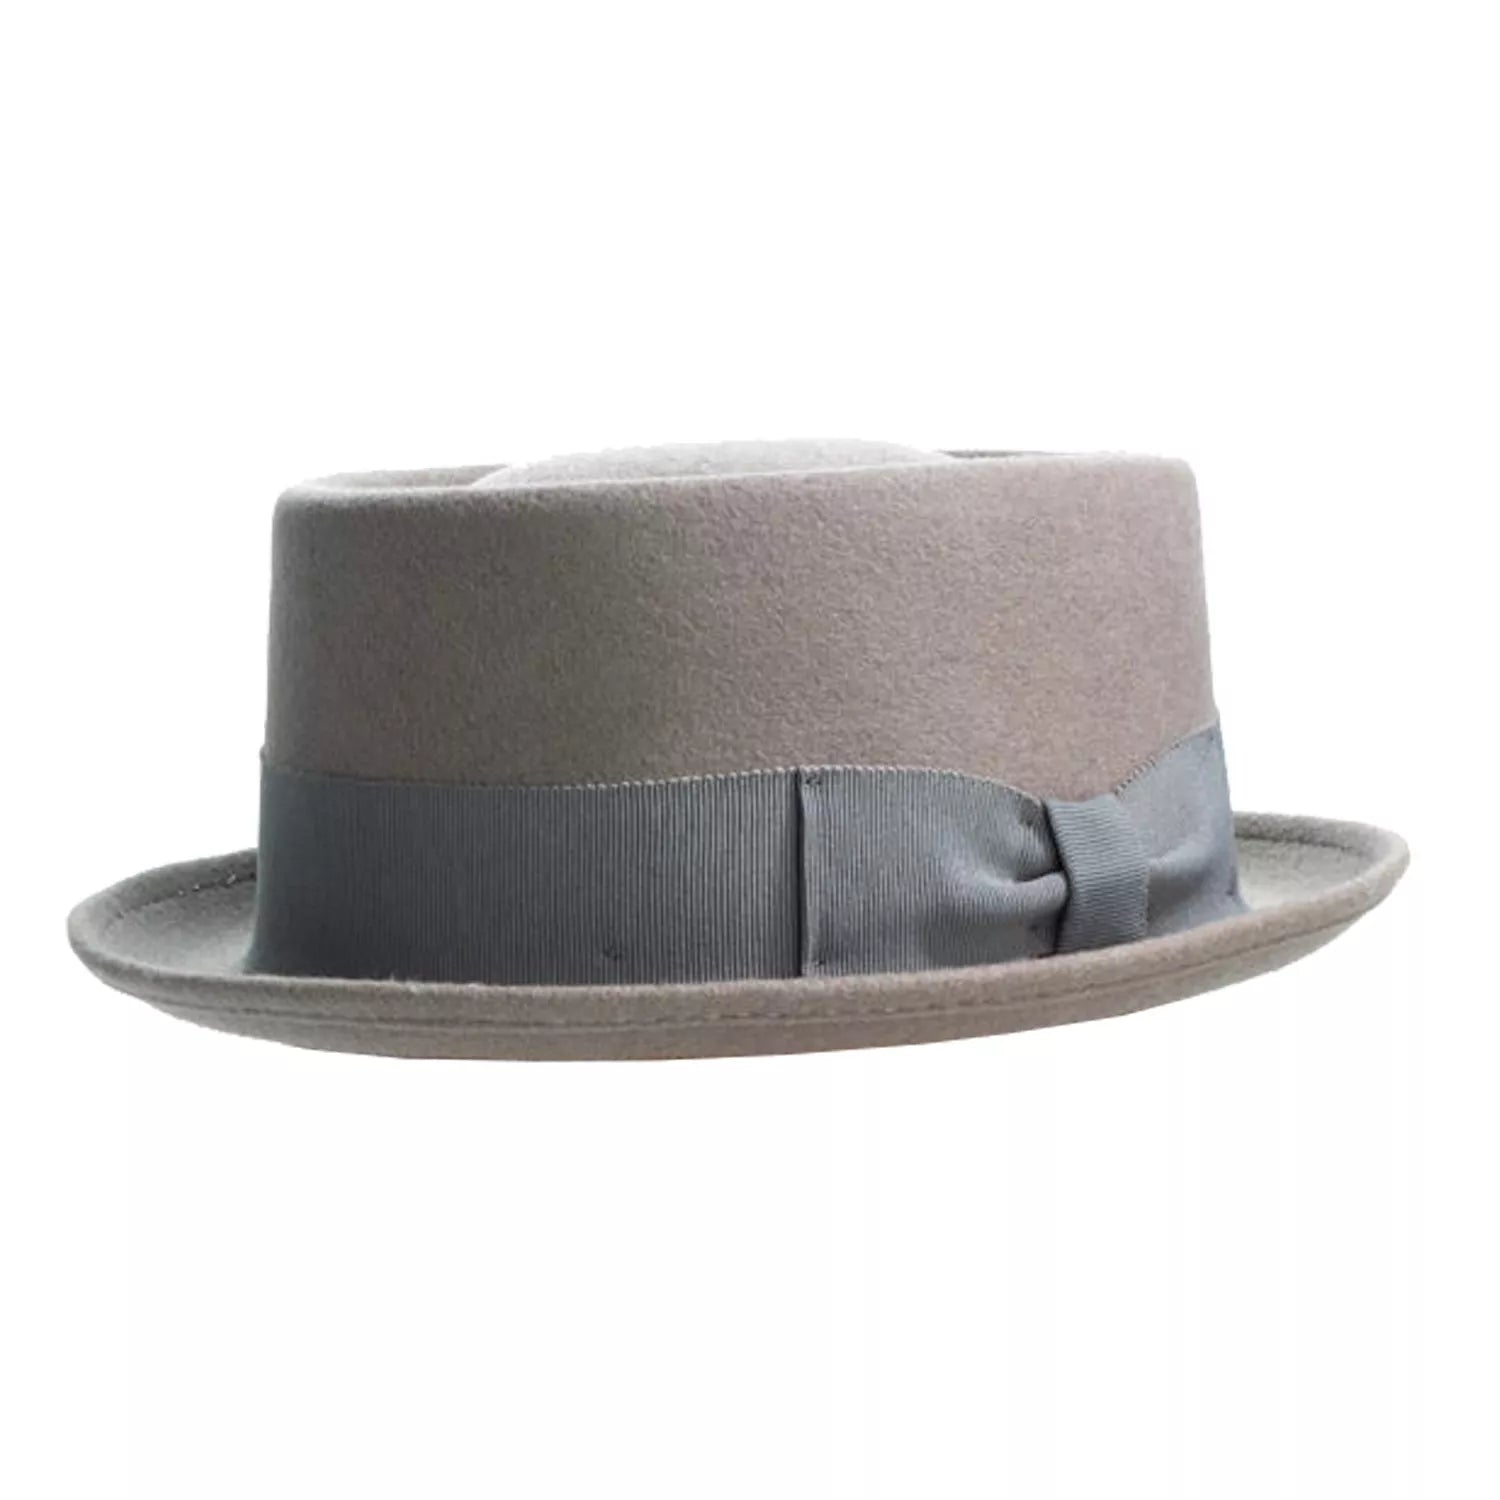 Effortless Cool With The Round Pork Pie Hat From Laird Hatters